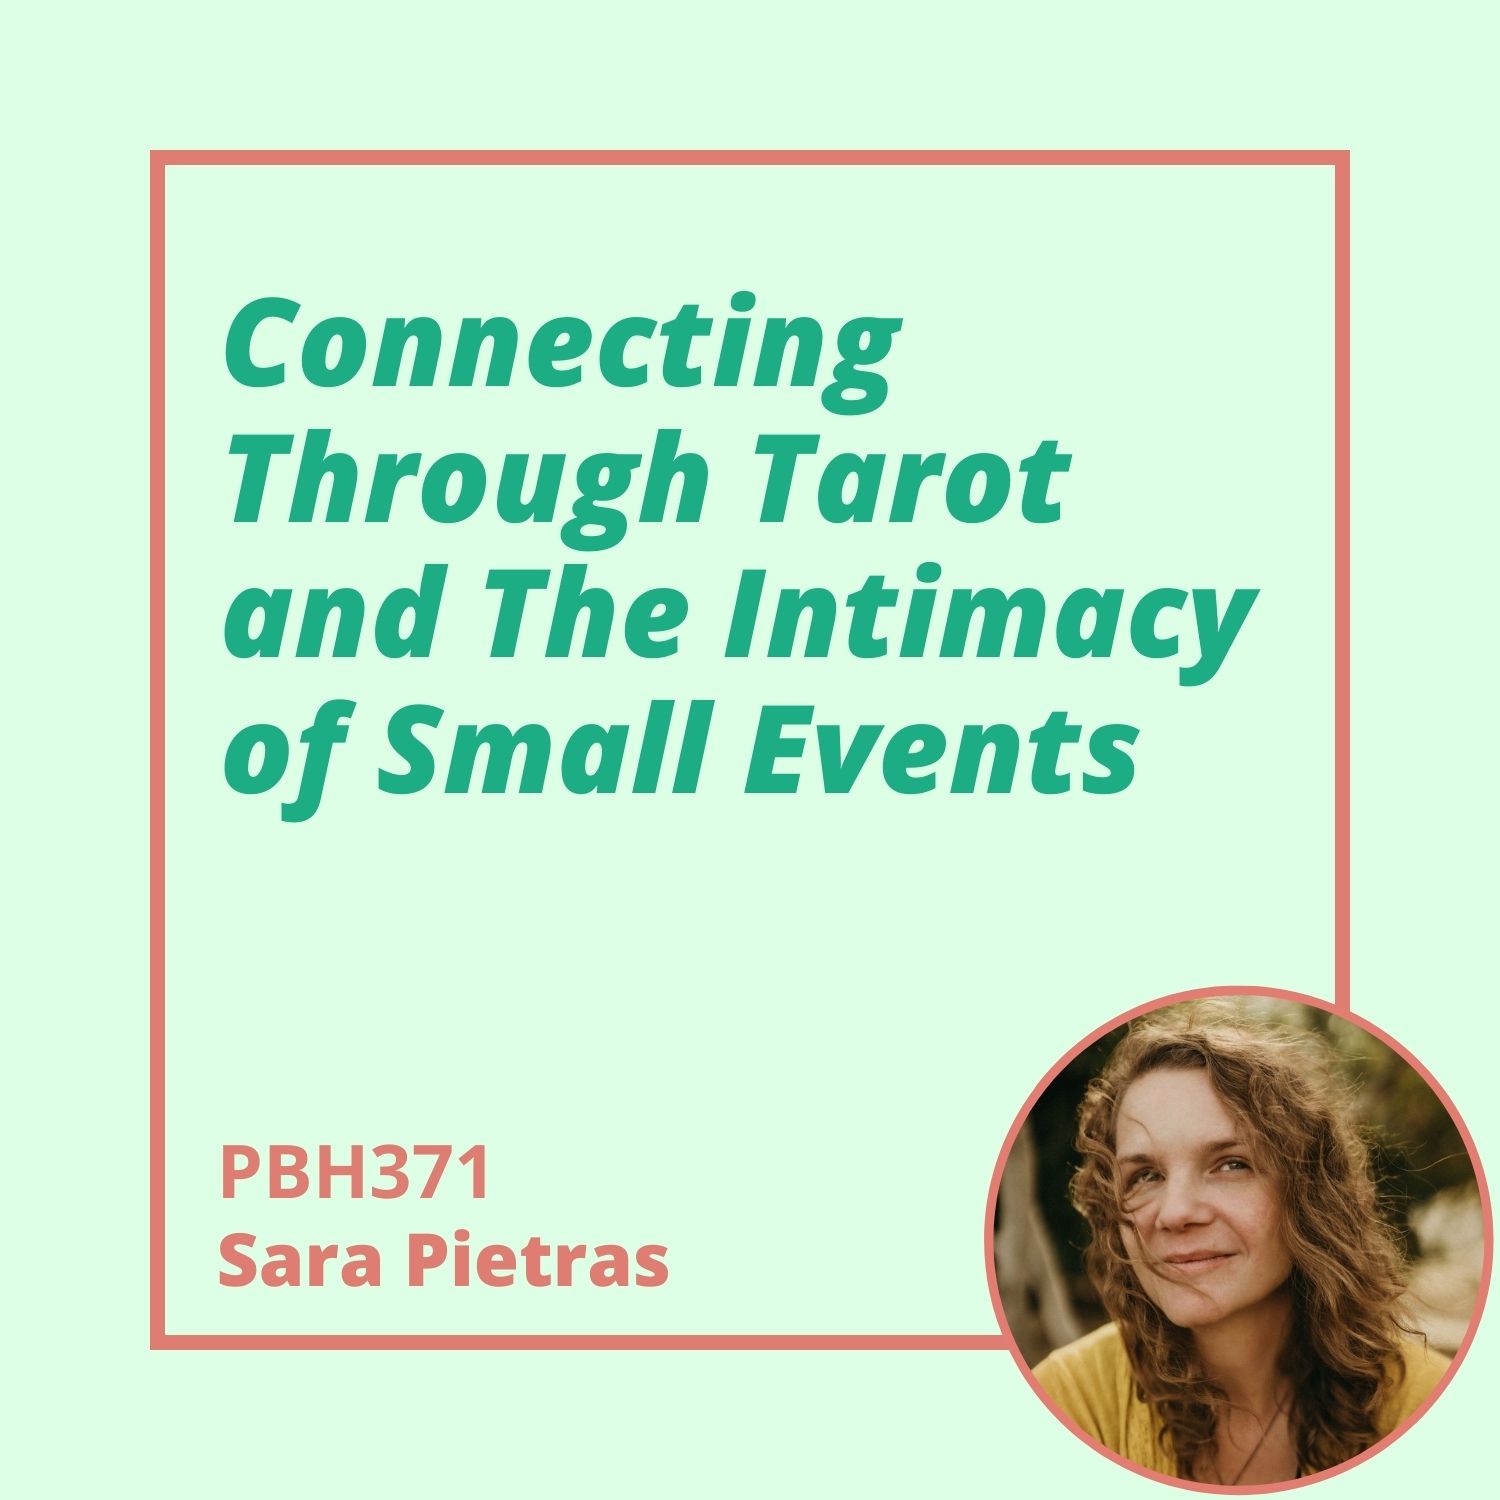 371: Sara Pietras - Connecting Through Tarot and The Intimacy of Small Events